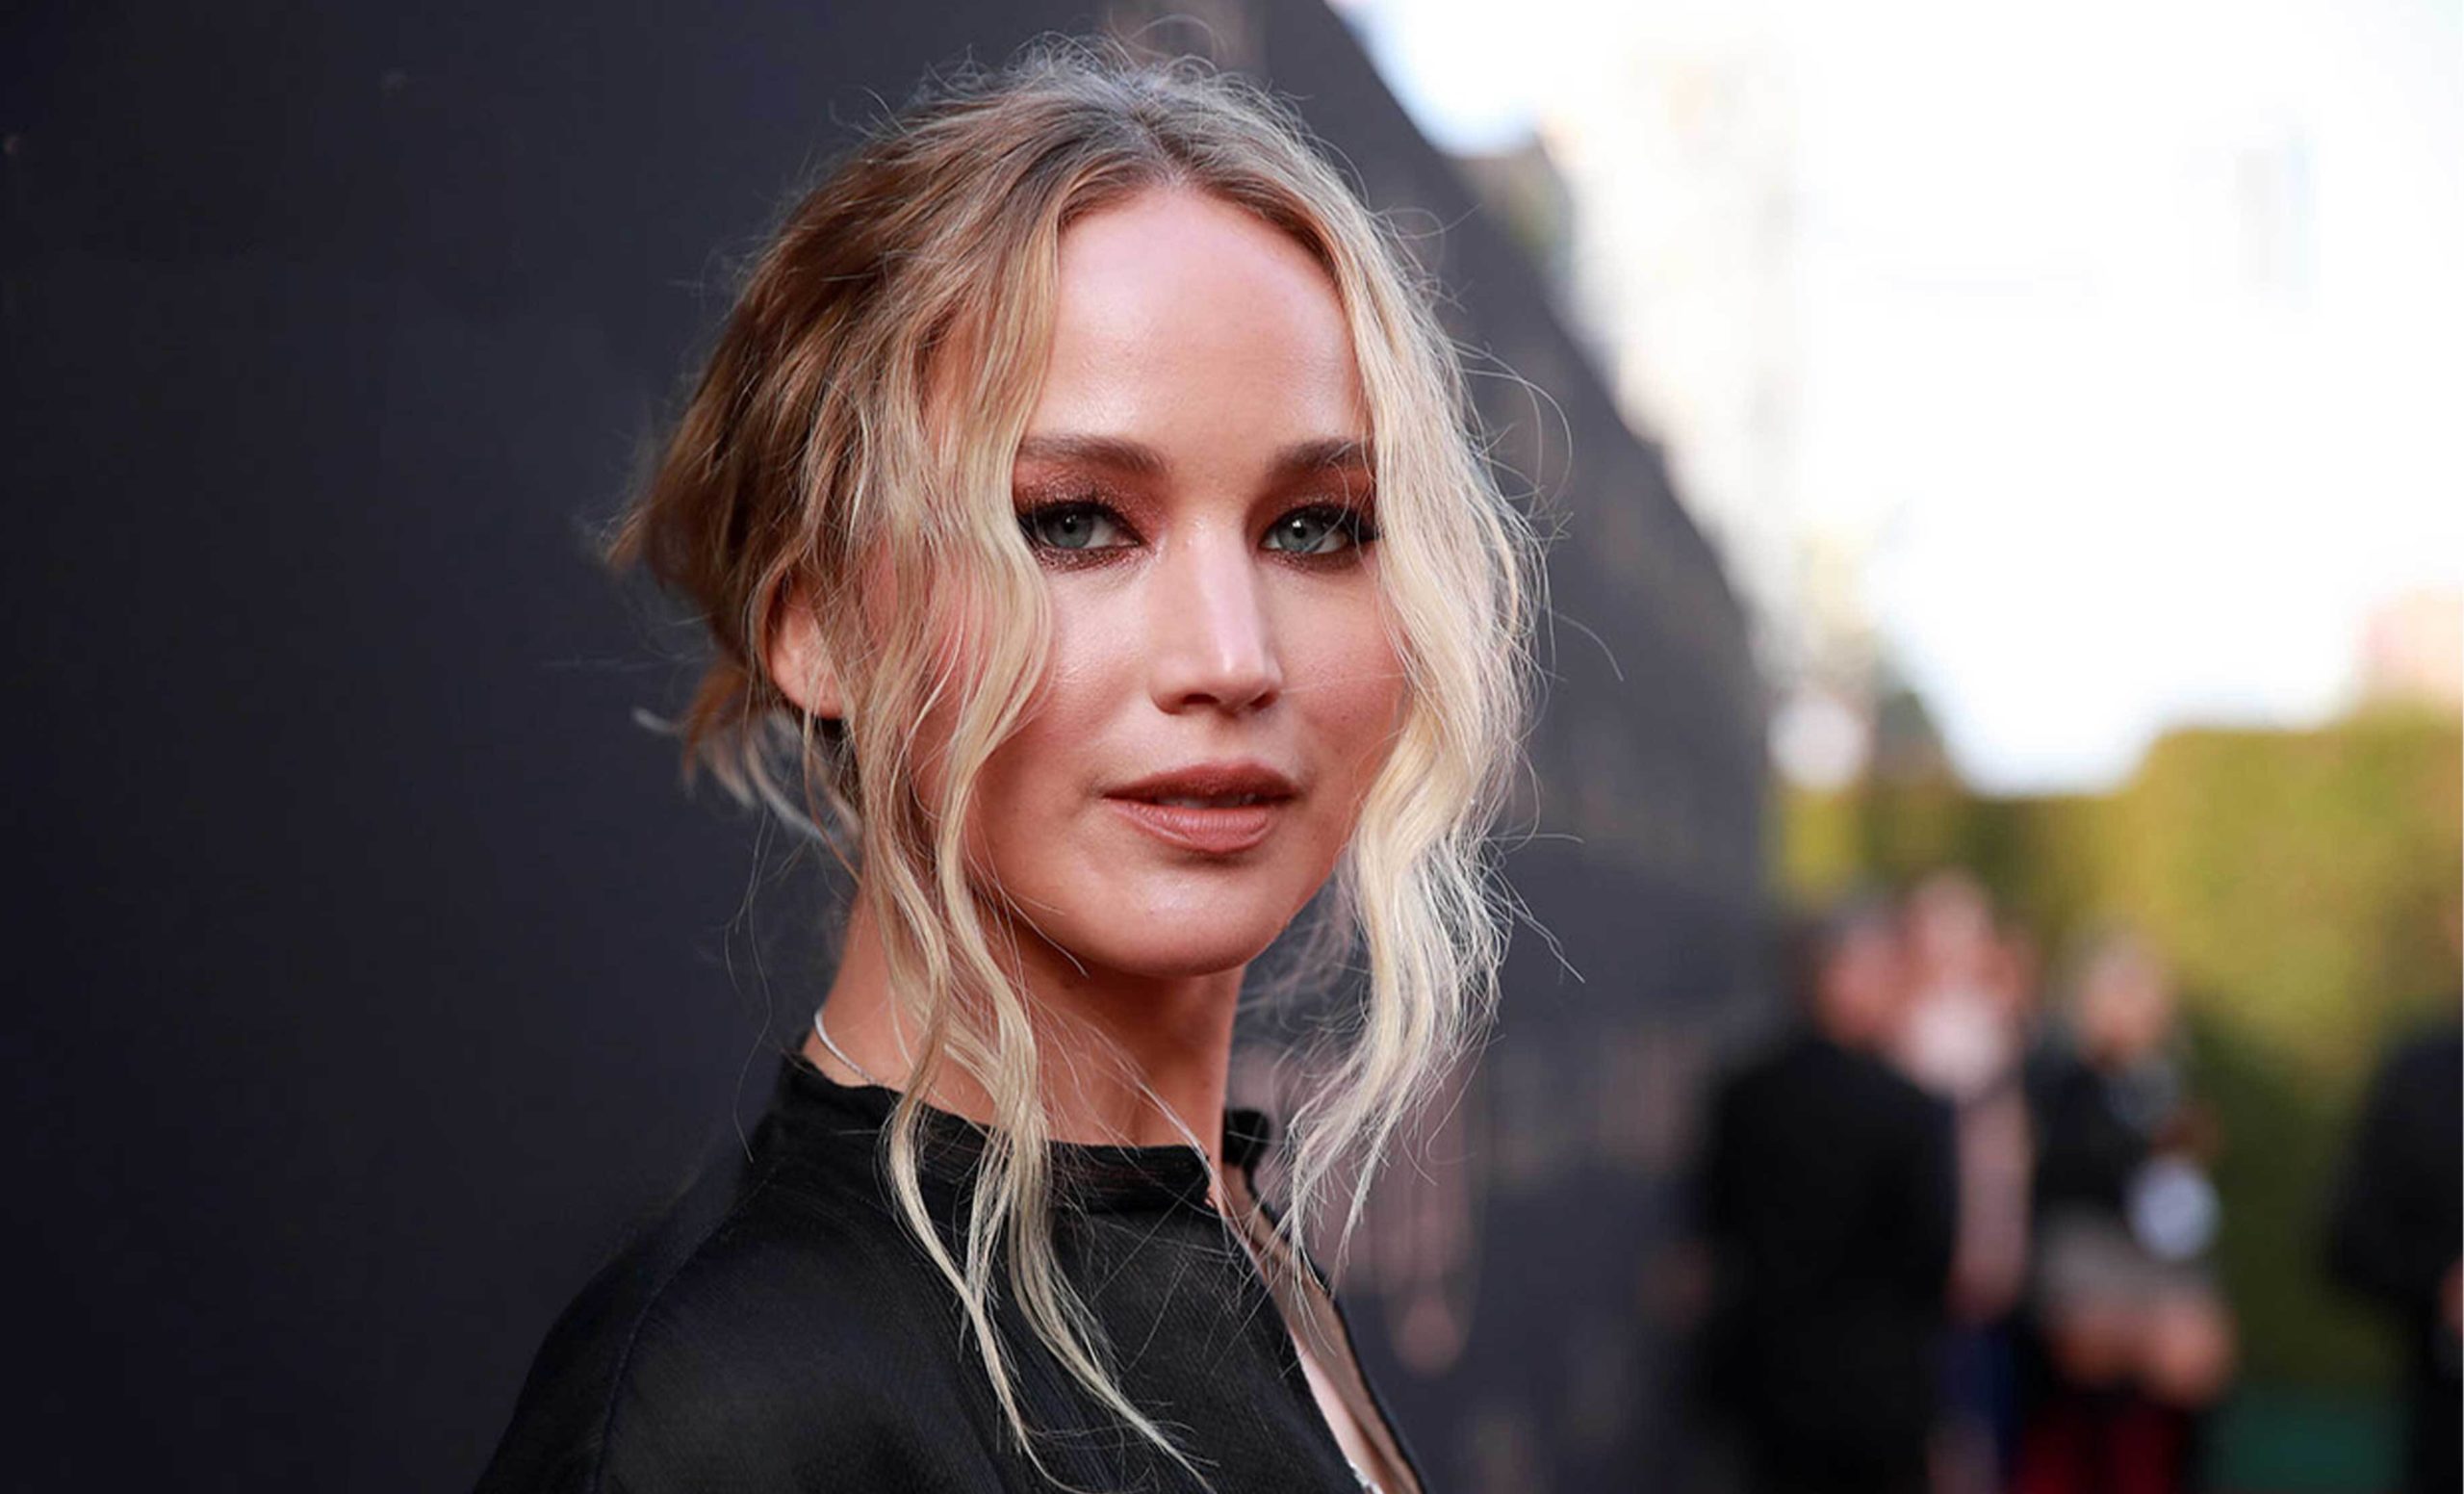 Jennifer Lawrence Opens Up About Wanting To Keep Soon-To-Be Child’s Life Private